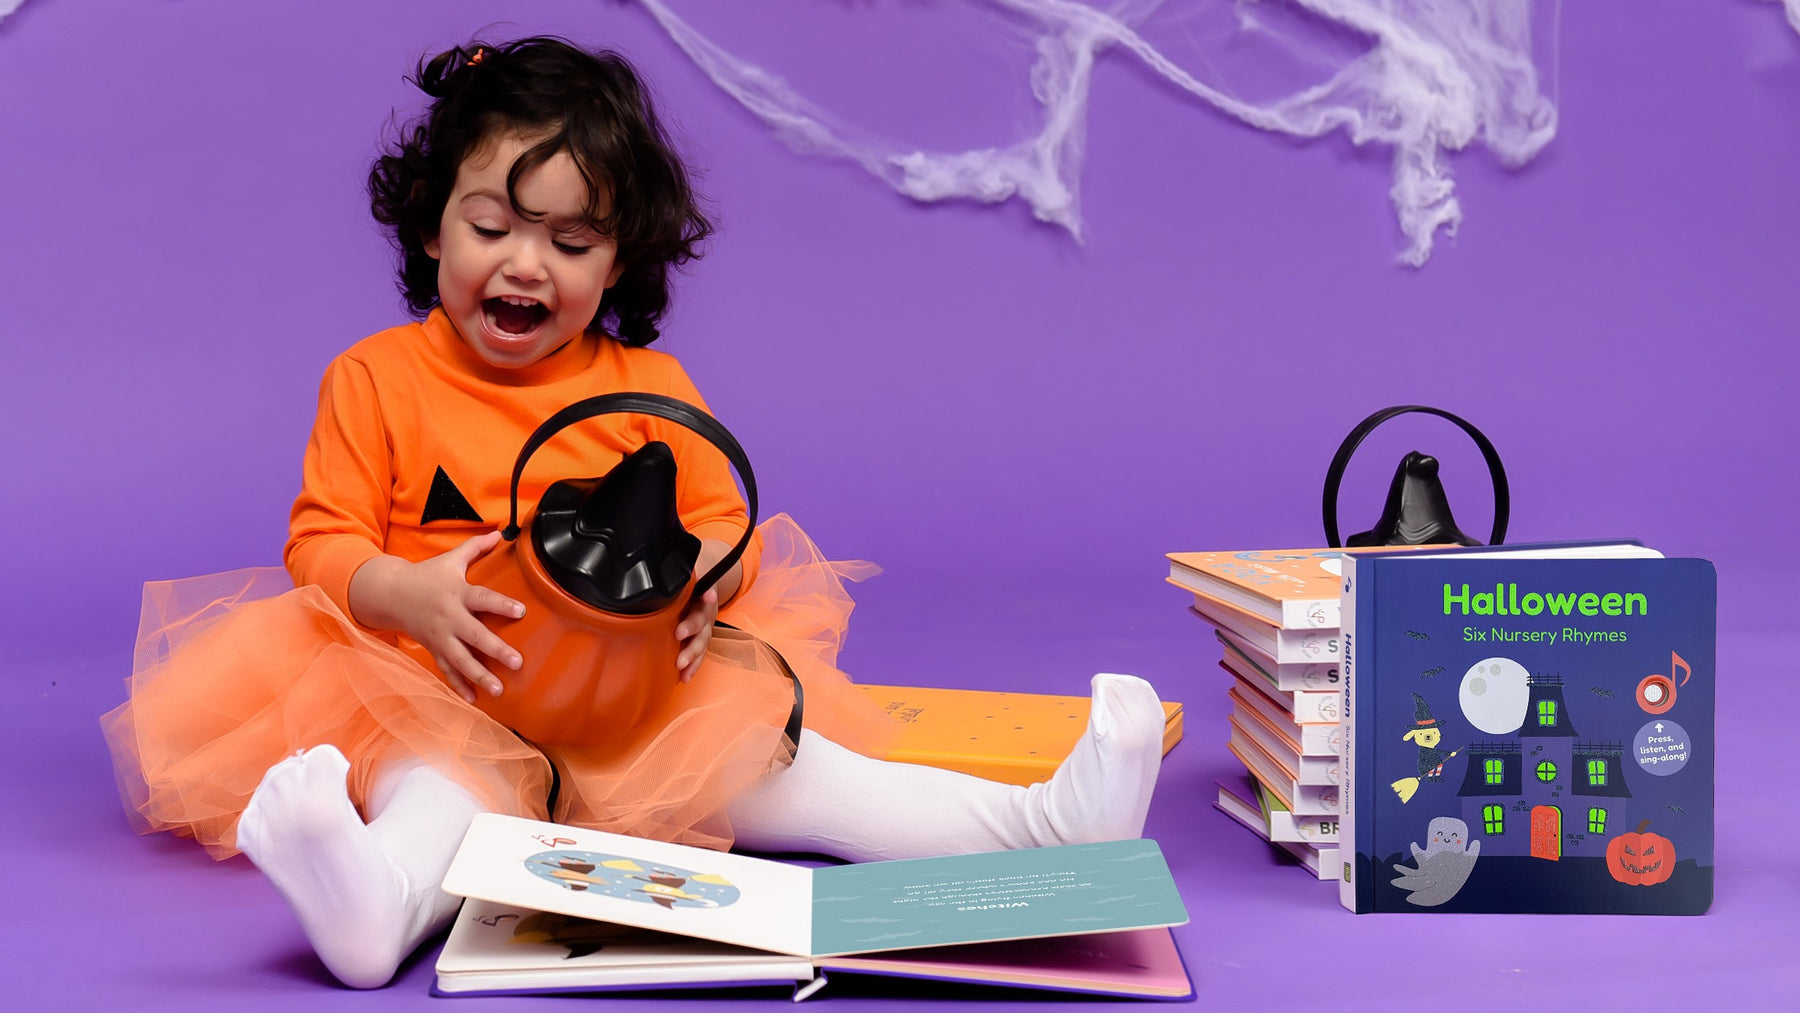 A toddler is playing with a pumpkin next to a pile of Halloween books. Family, fun Halloween activities, kids books.